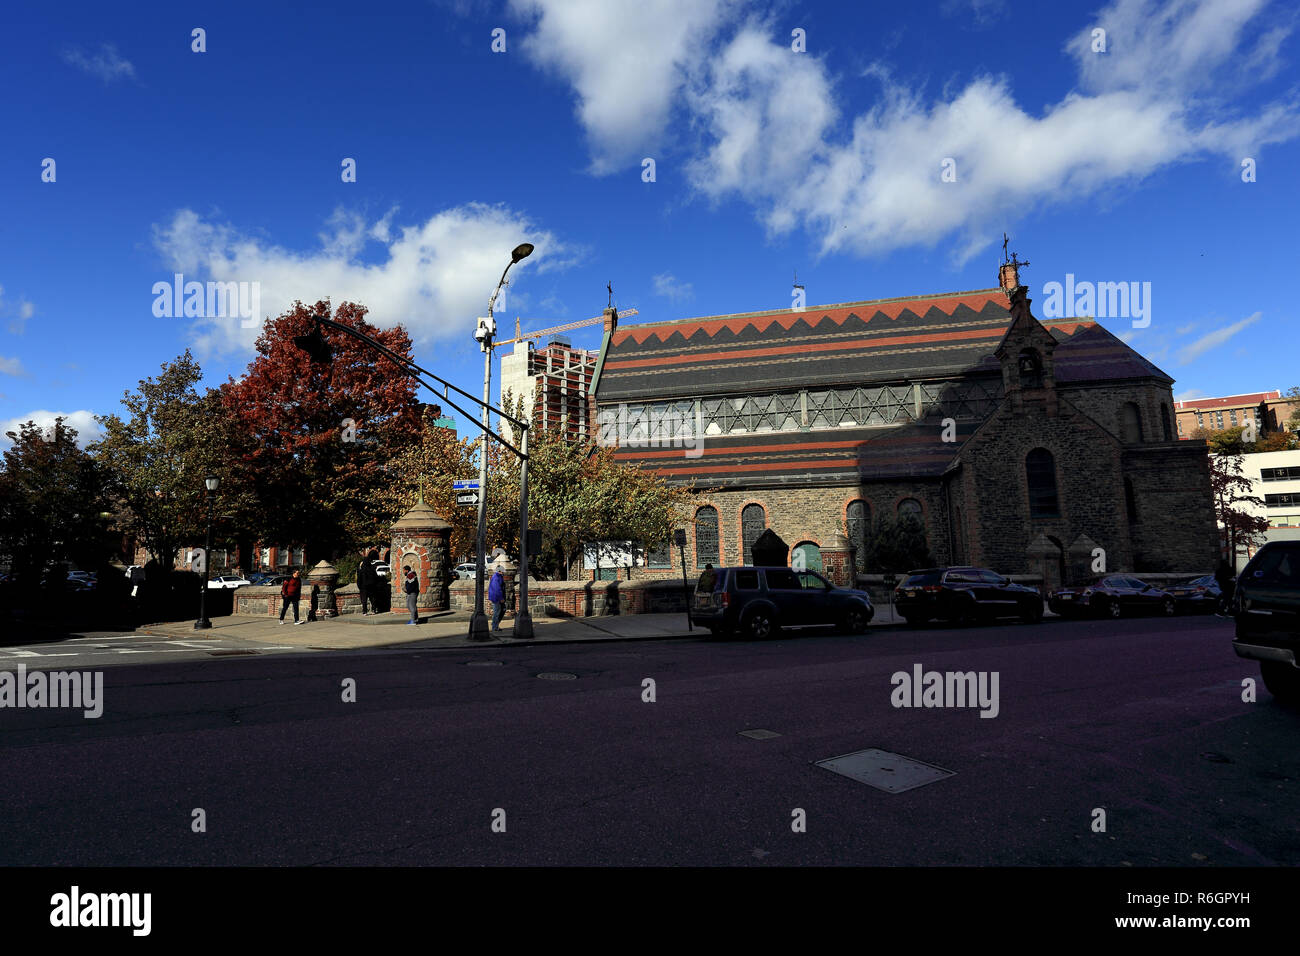 St. Johns Episcopal Church Getty Square Yonkers New York Stock Photo